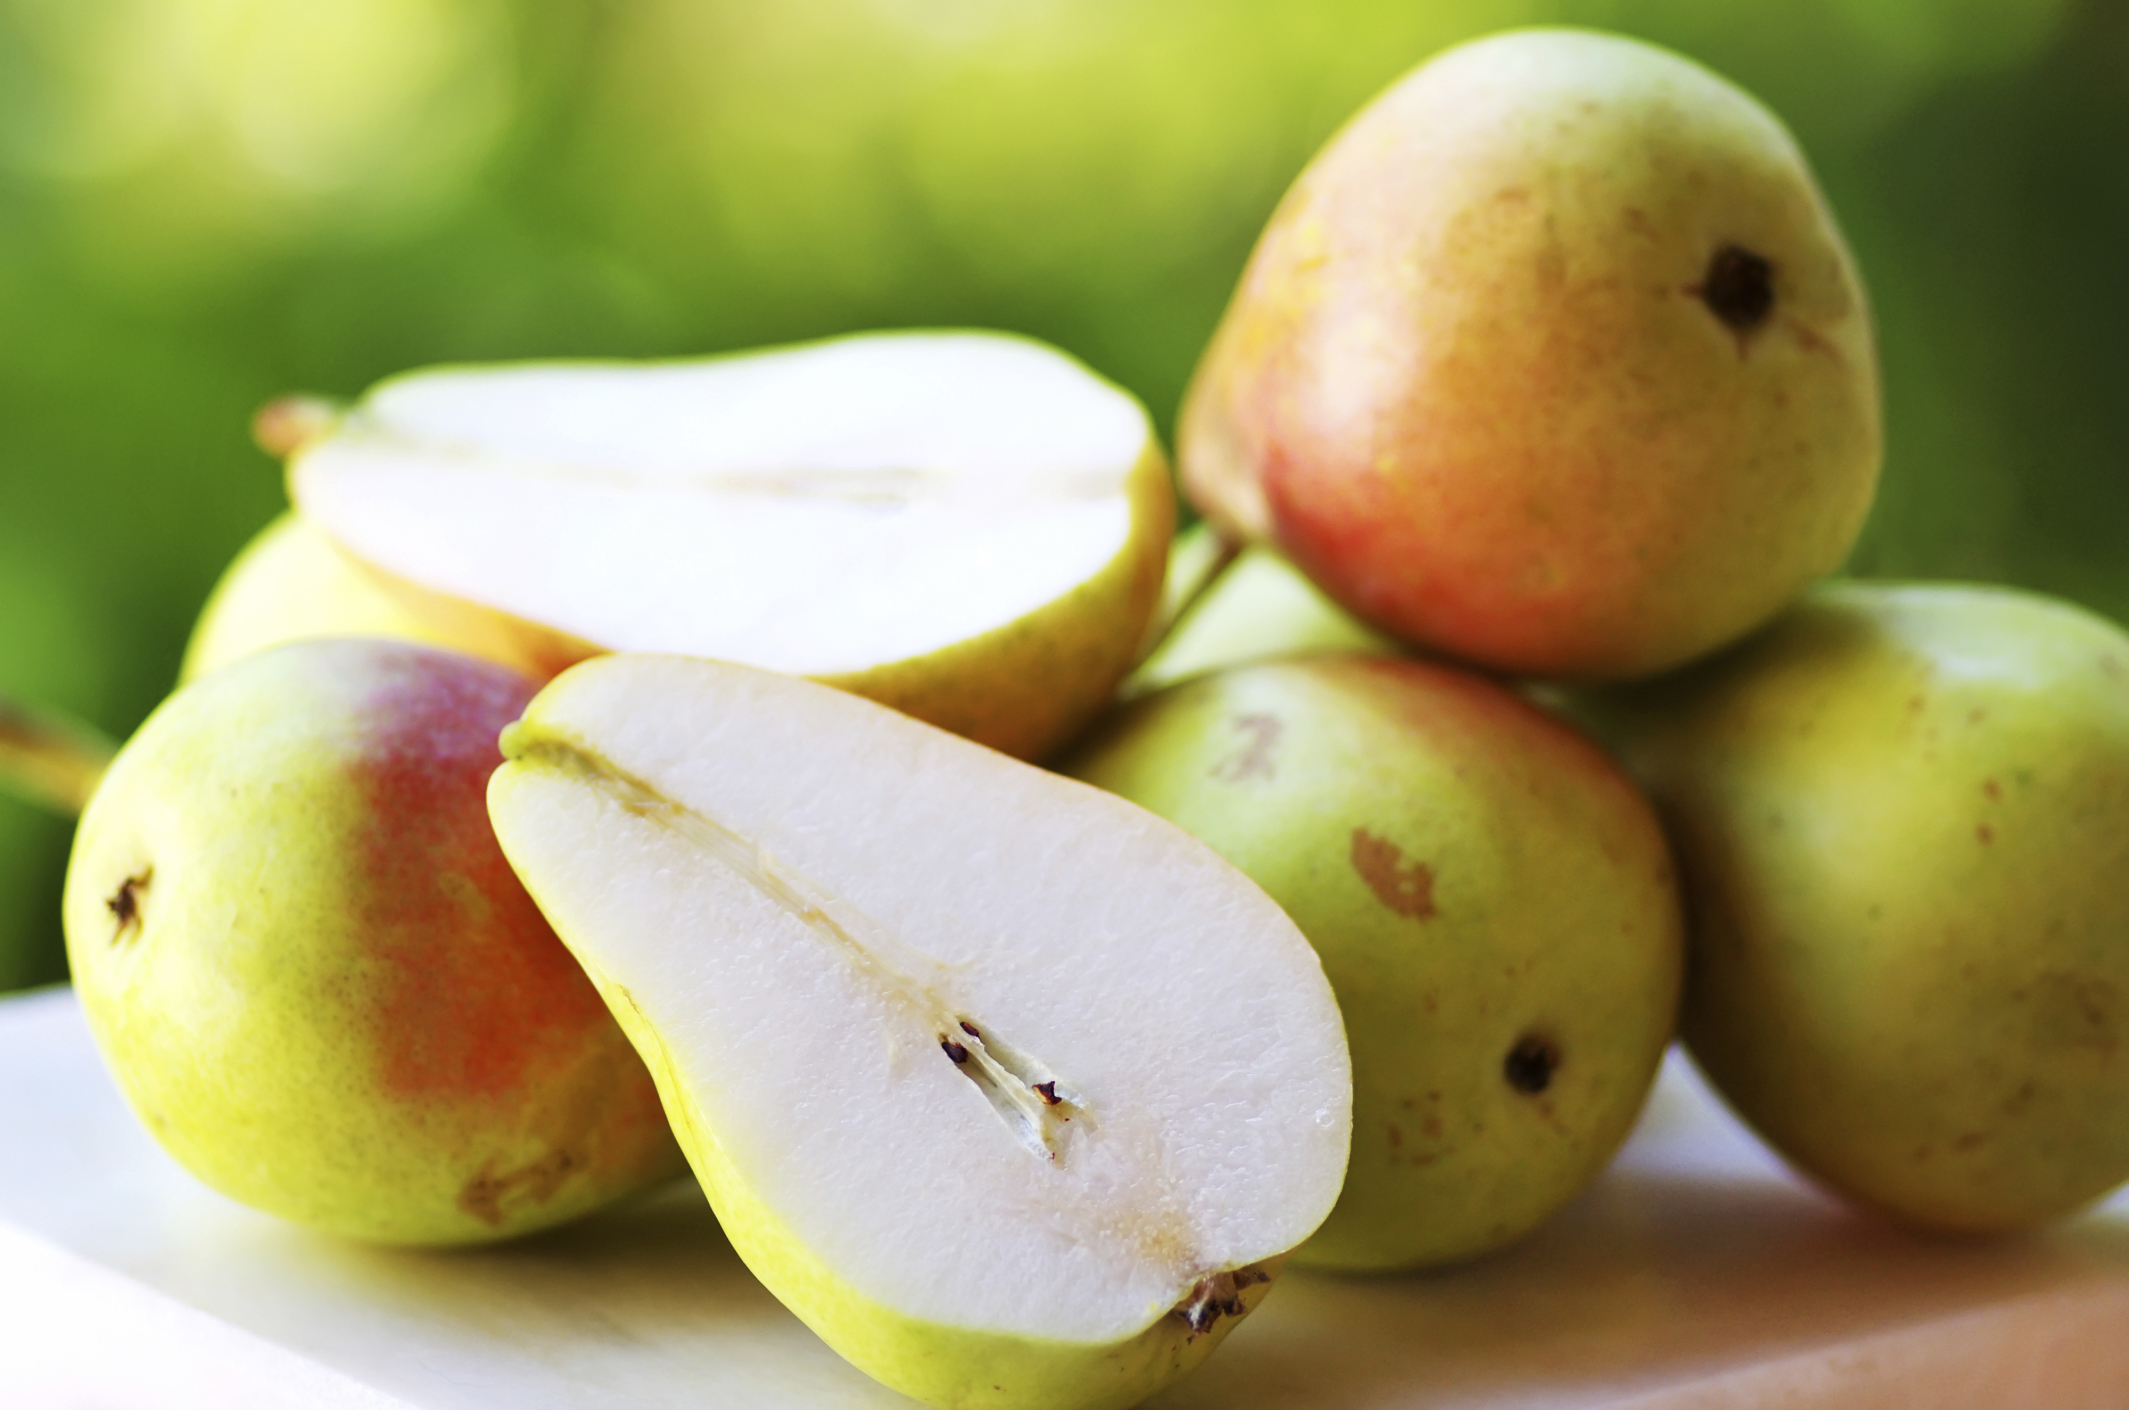 Study: Pear juice could help prevent hangovers